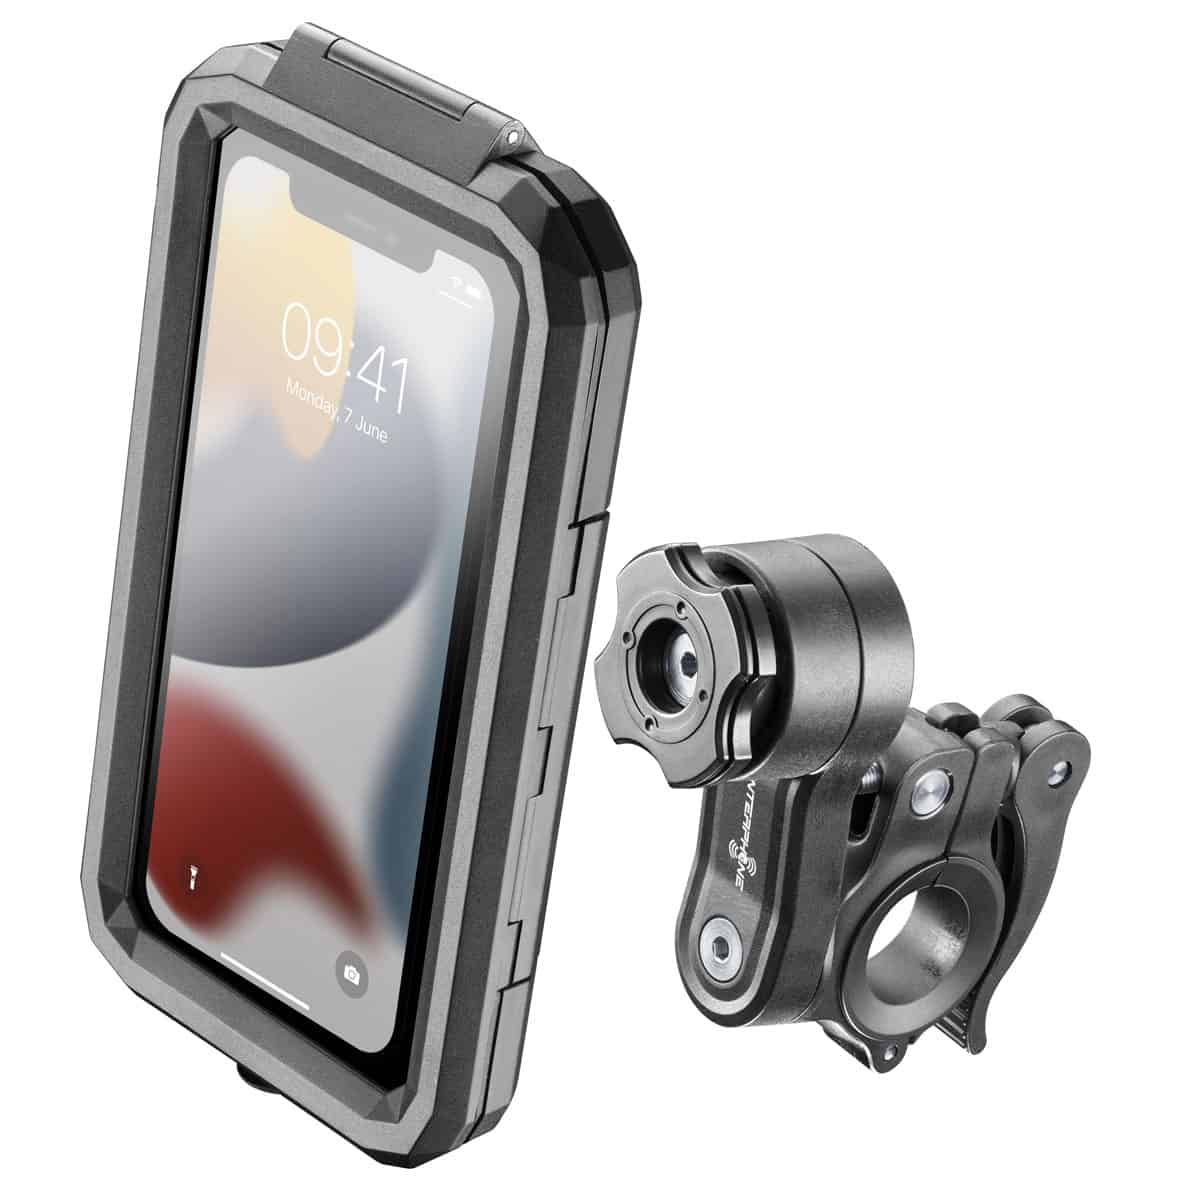 The Quiklox Armor Pro phone motorcycle handle bar mount & phone case: Rock-solid protection for your phone on the move - 2